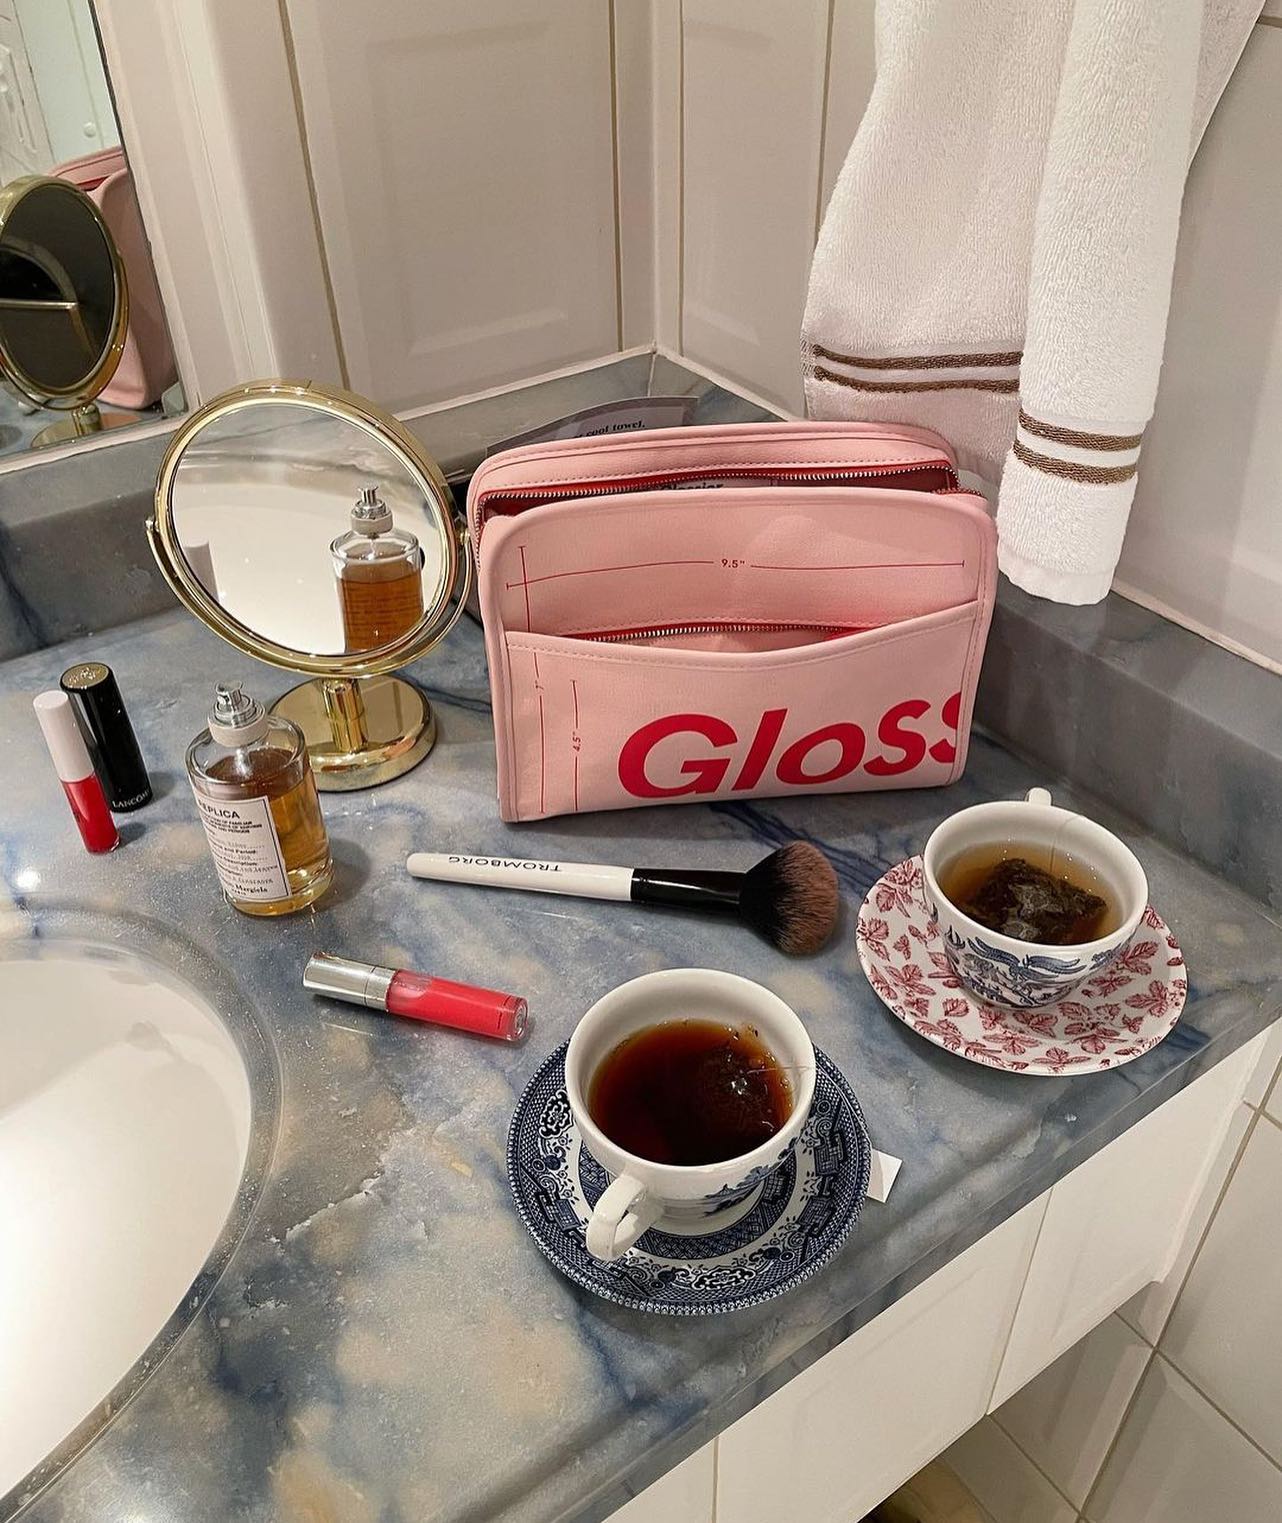 A Glossier make up bag is positioned on a bathroom counter top alongside cups of tea and other Glossier products.